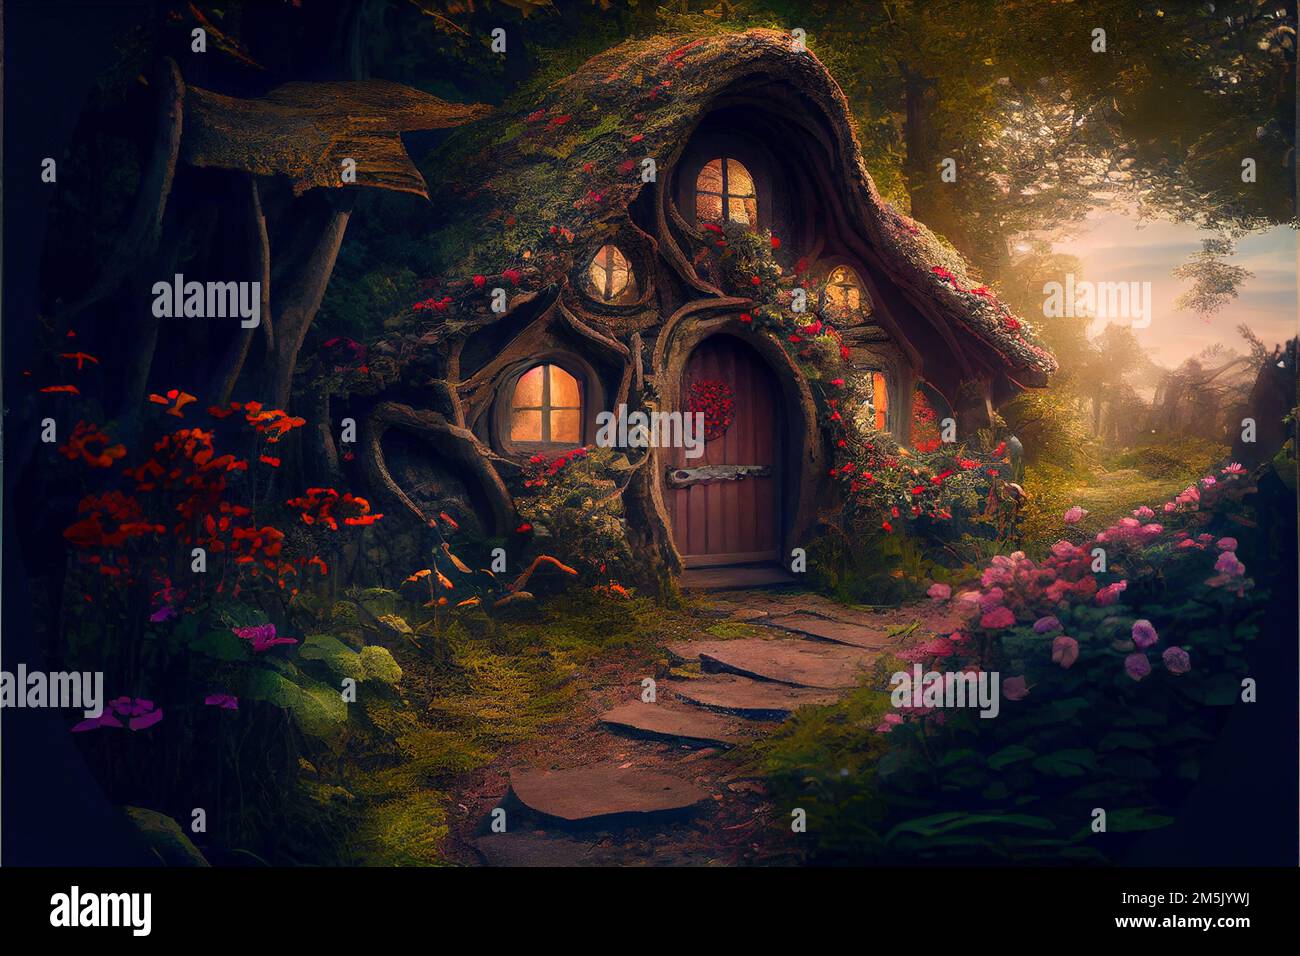 Hobbit house in fantasy forest at night. Fairy tale home in magic wood at sunset. Scenery of fairytale habitation, path and flower gard Stock Photo